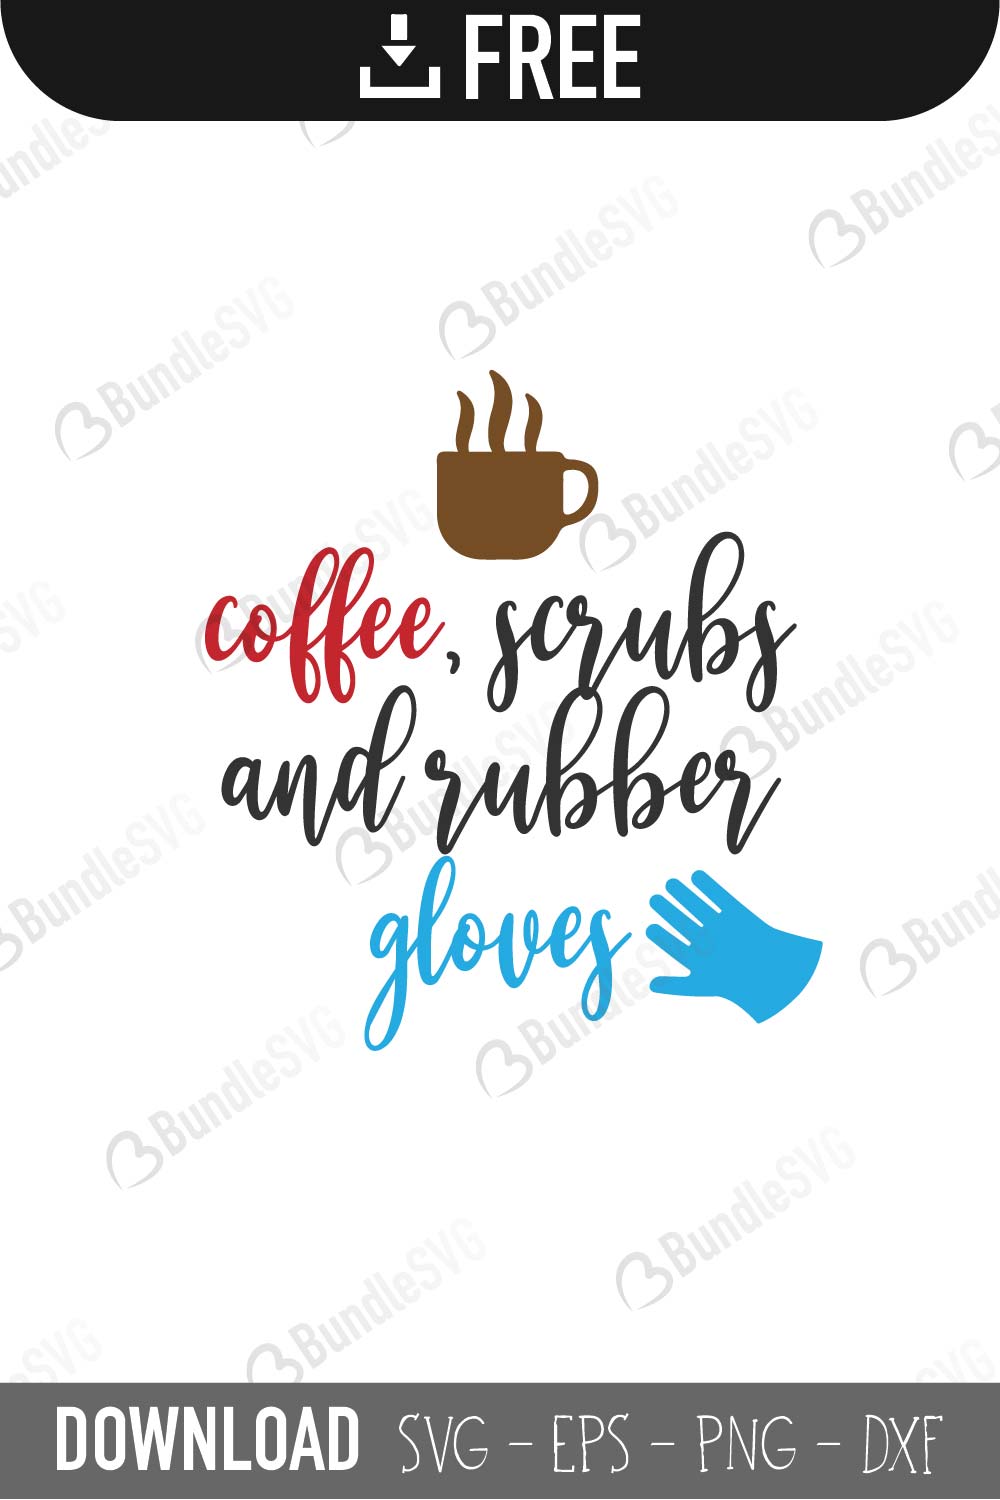 Coffee Scrubs and Rubber Gloves SVG Cut Files Free ...